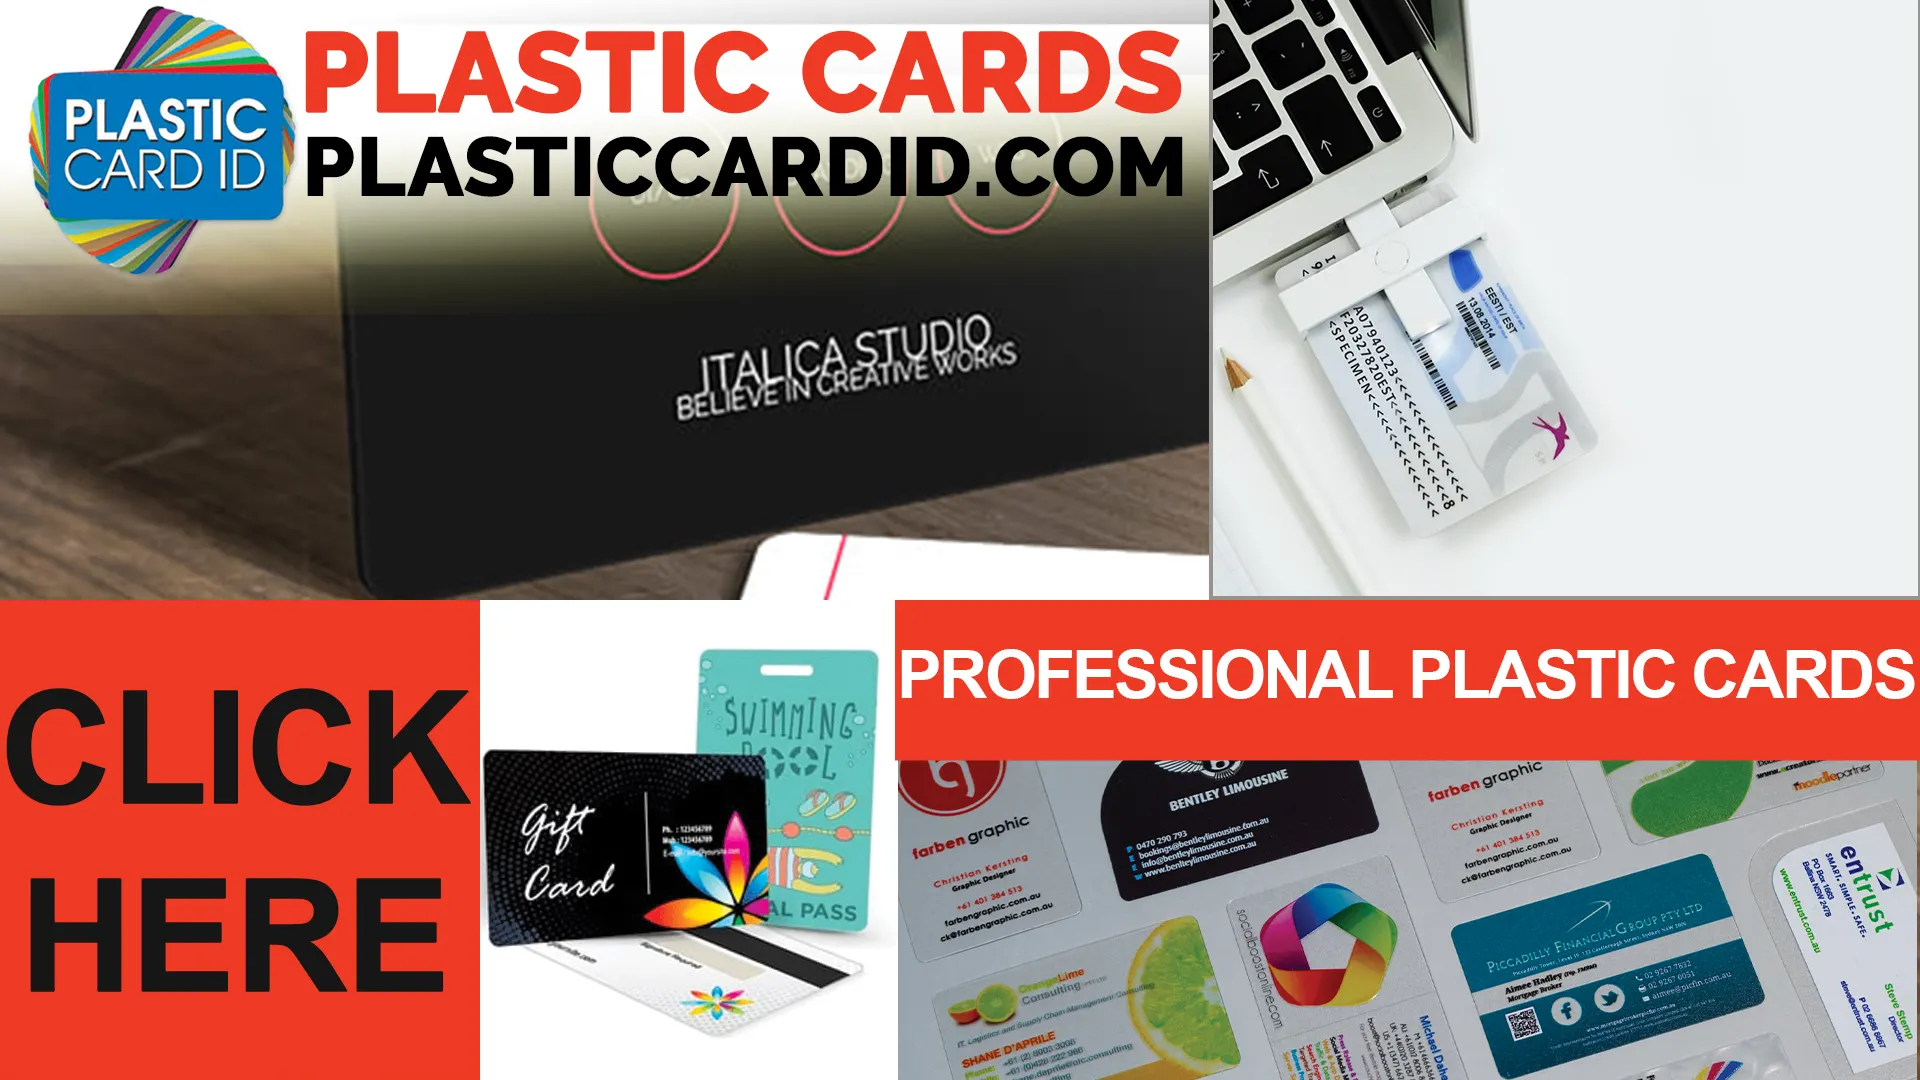 Welcome to the World of High-Quality Plastic Card Printing